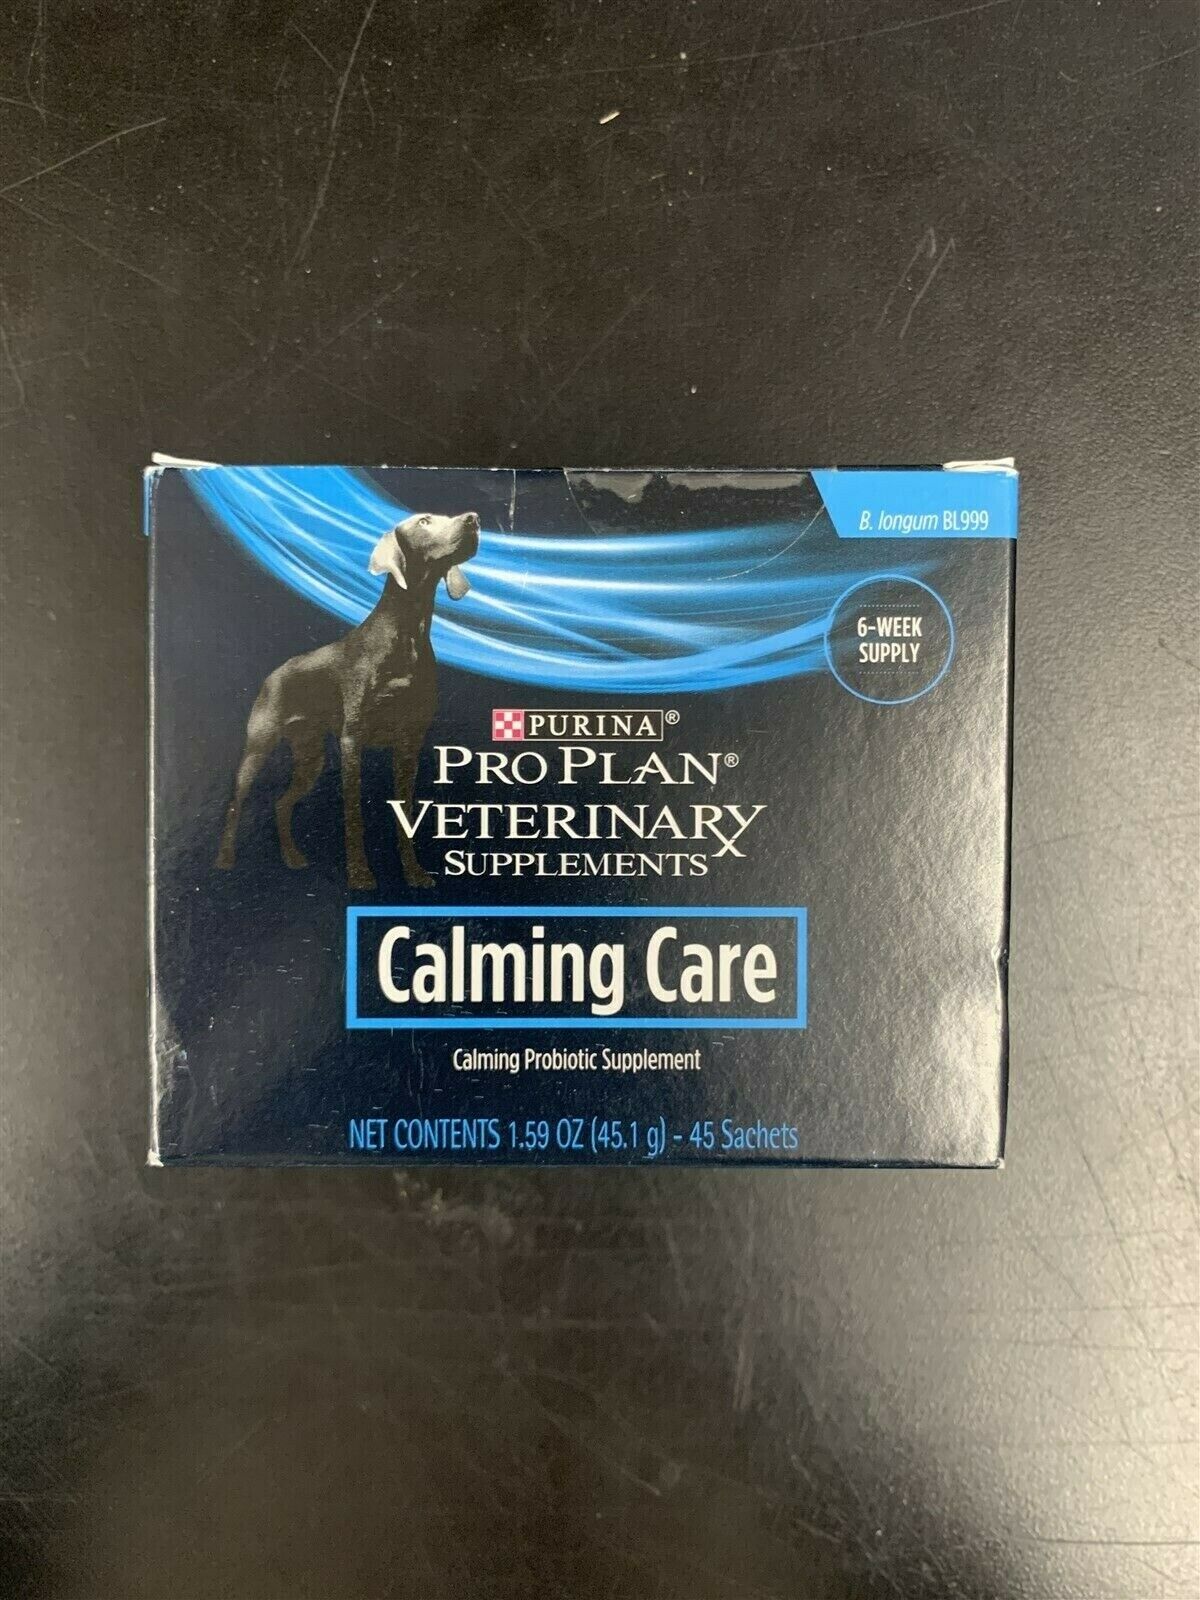 Purina Pro Plan Veterinary Supplements Calming Care 6 Week Supply Exp 3/22+ 3552